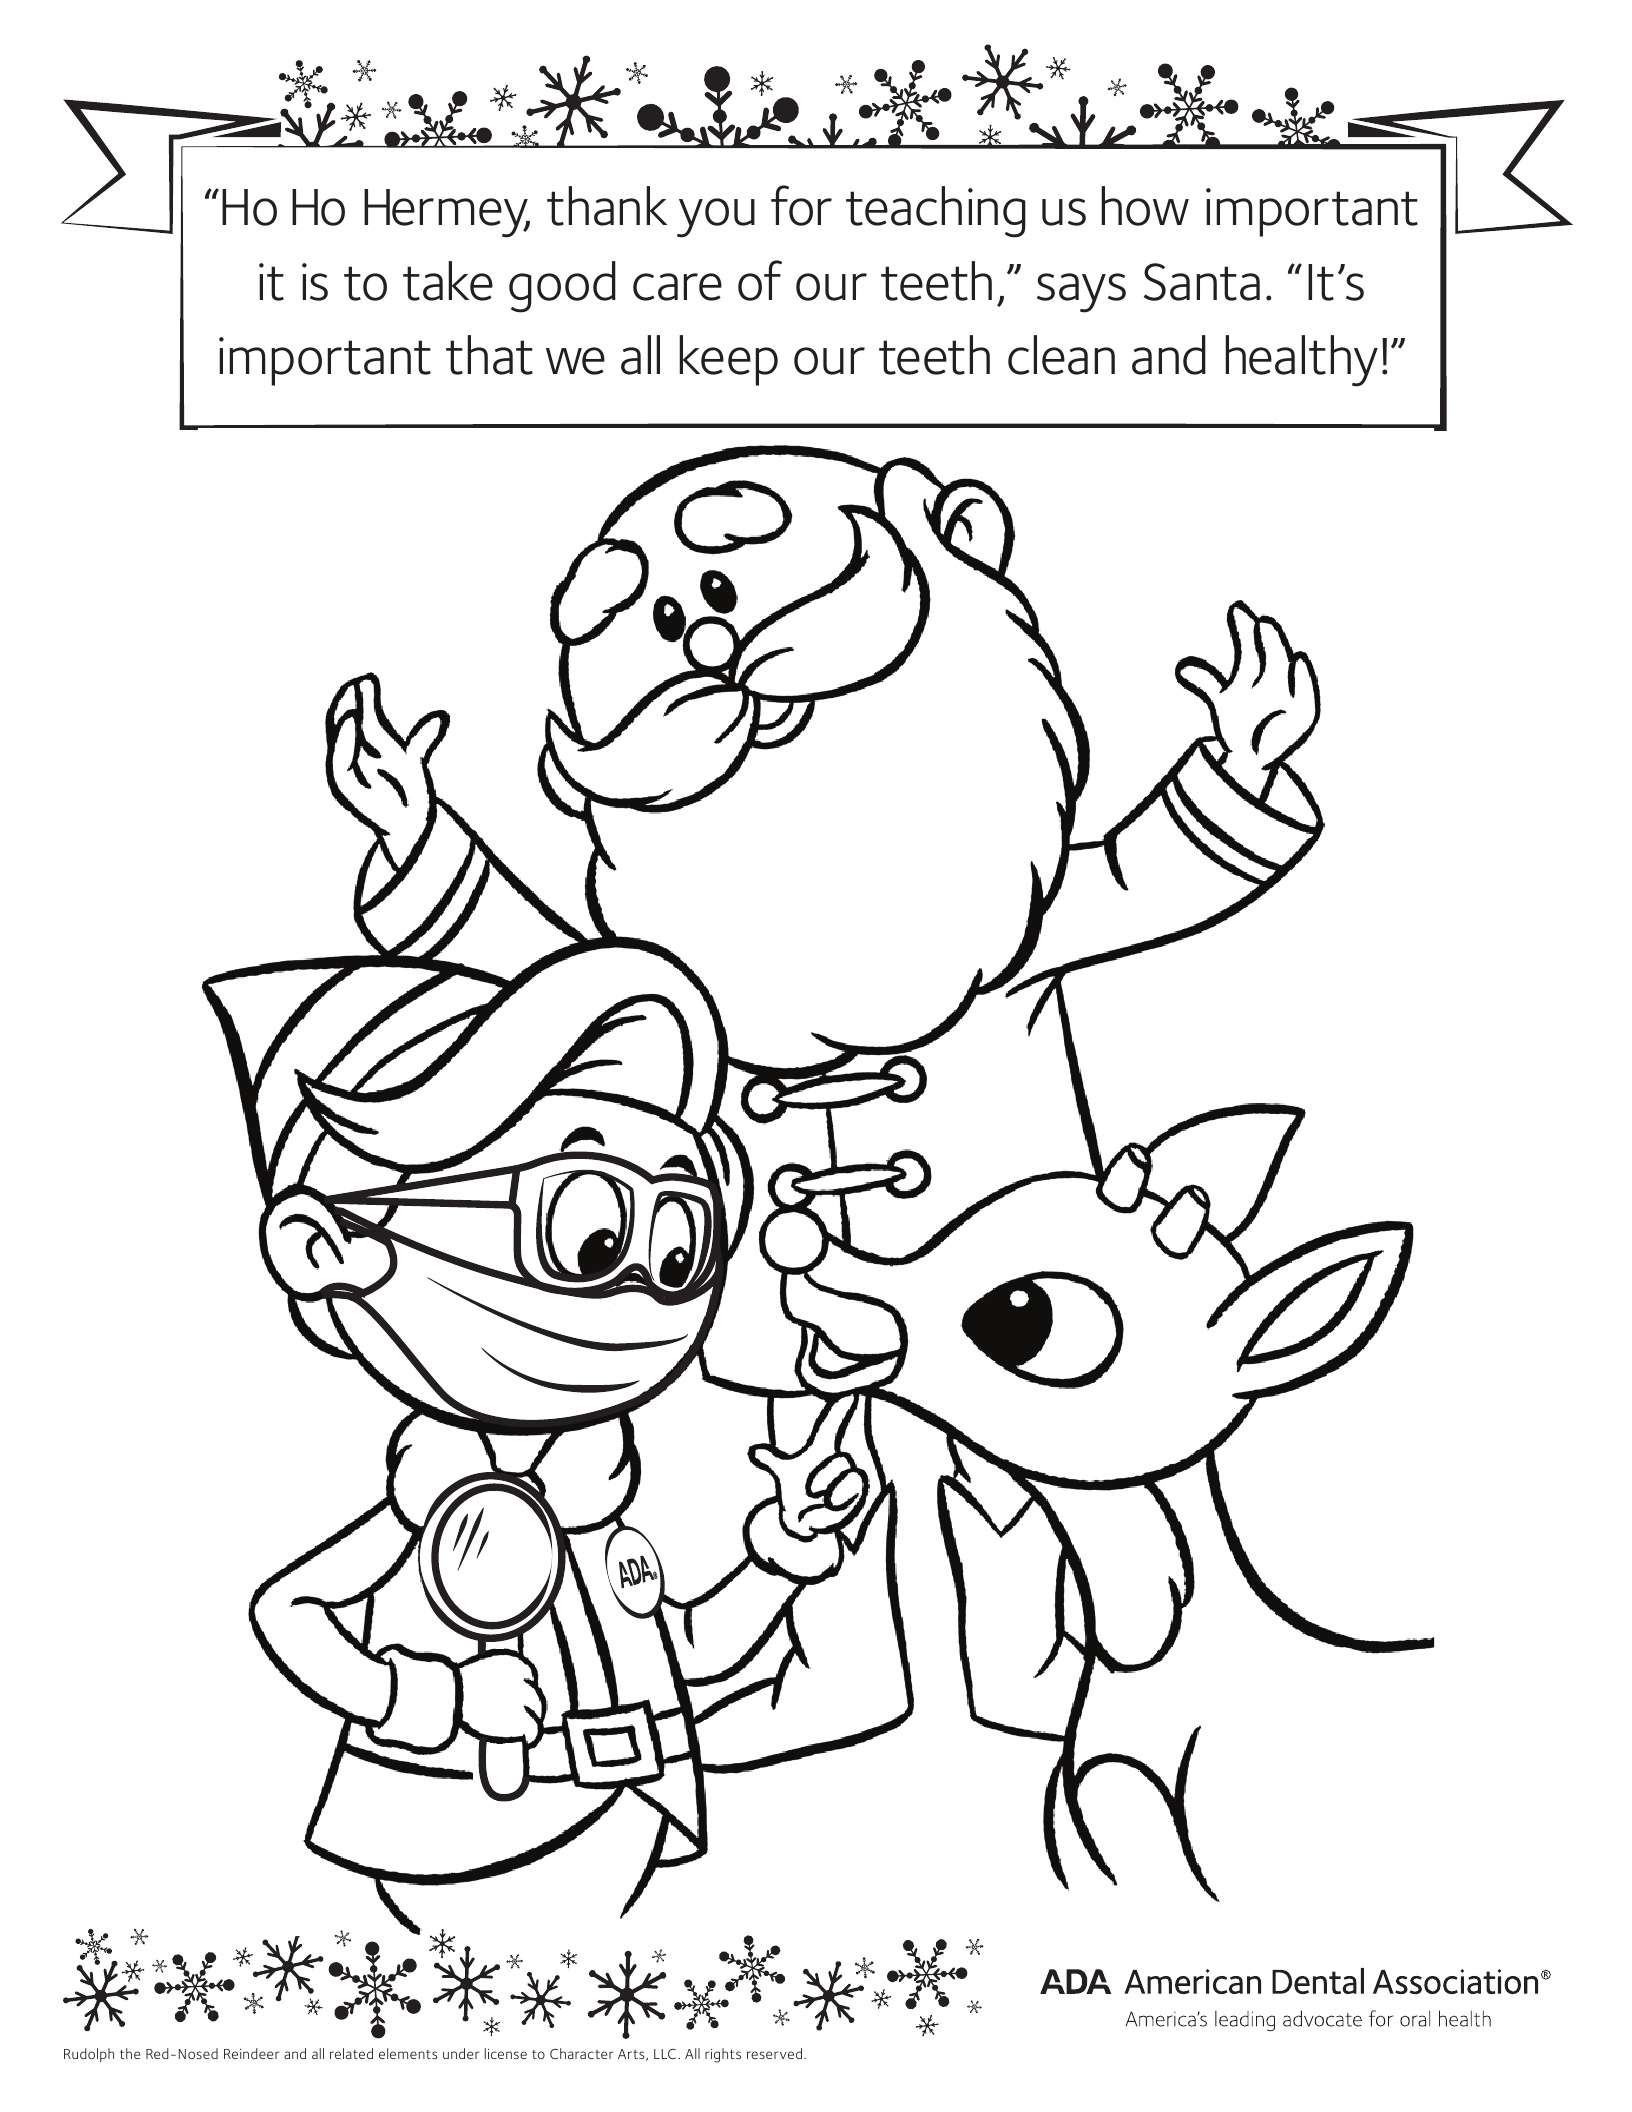 Santa And Rudolph Coloring Pages Coloring Book 37 Rudolph Coloring Pages Image Ideas Original